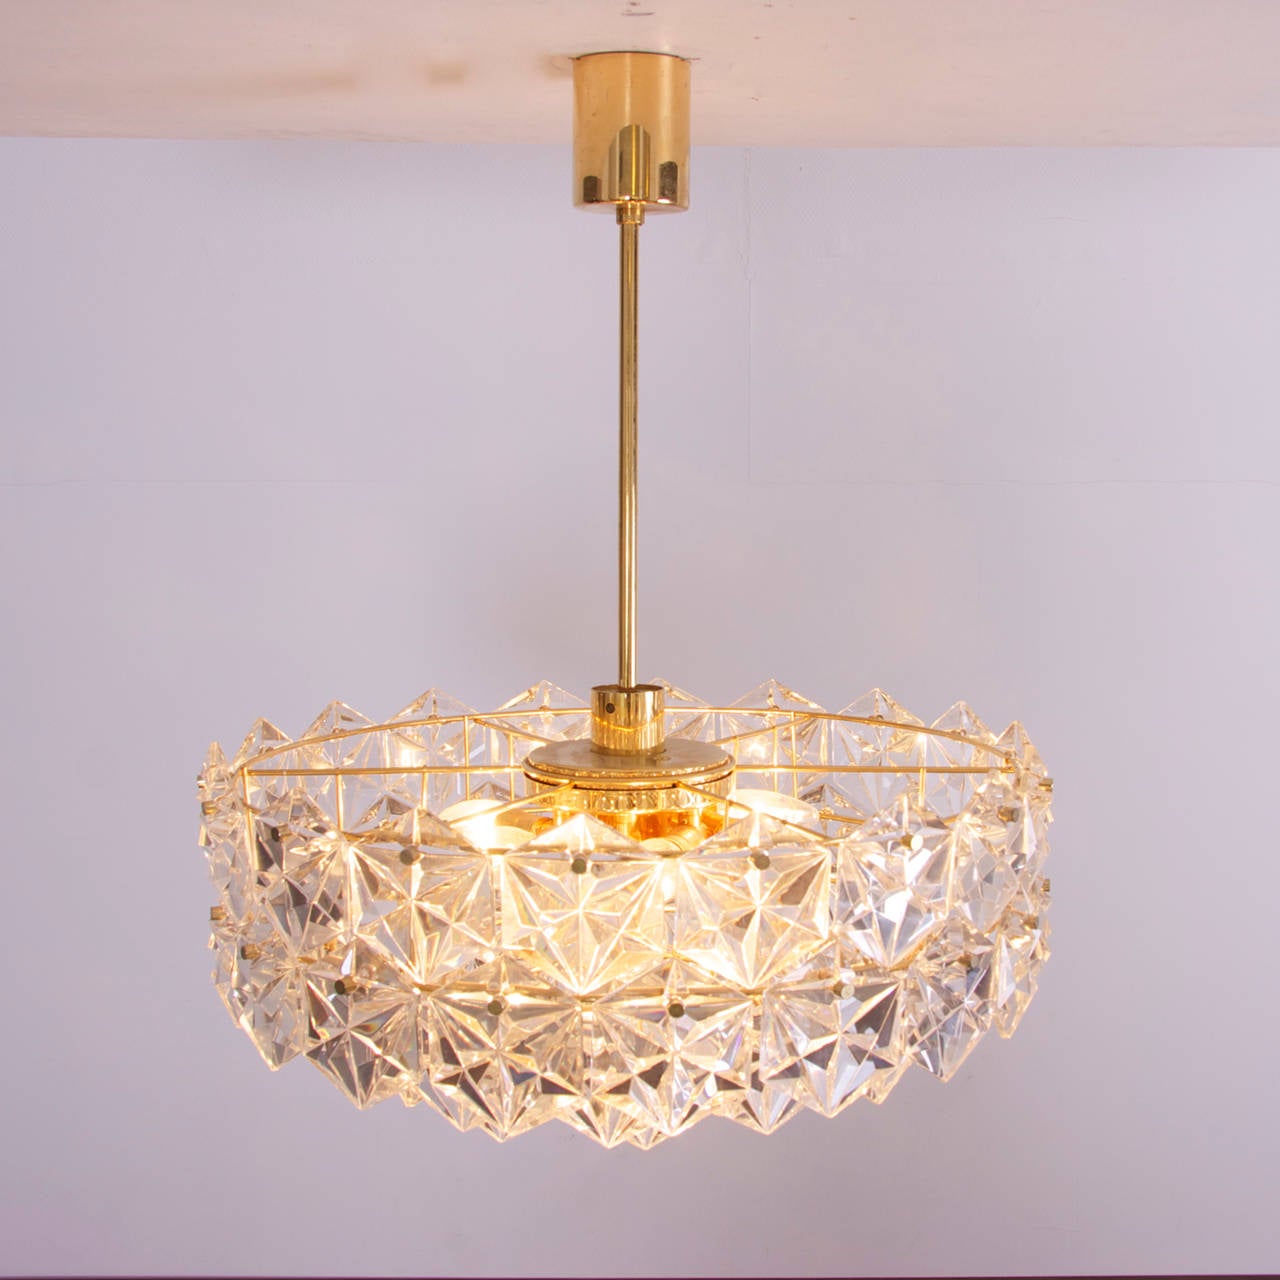 Stunning, large four-tier chandelier by Kinkeldey with huge gem-like crystals and gold-plated brass frame. Chandelier is fitted with six E14 bulbs and one E27 bulb.

More stunning Kinkeldey chandeliers in other sizes and forms and wall lamps are